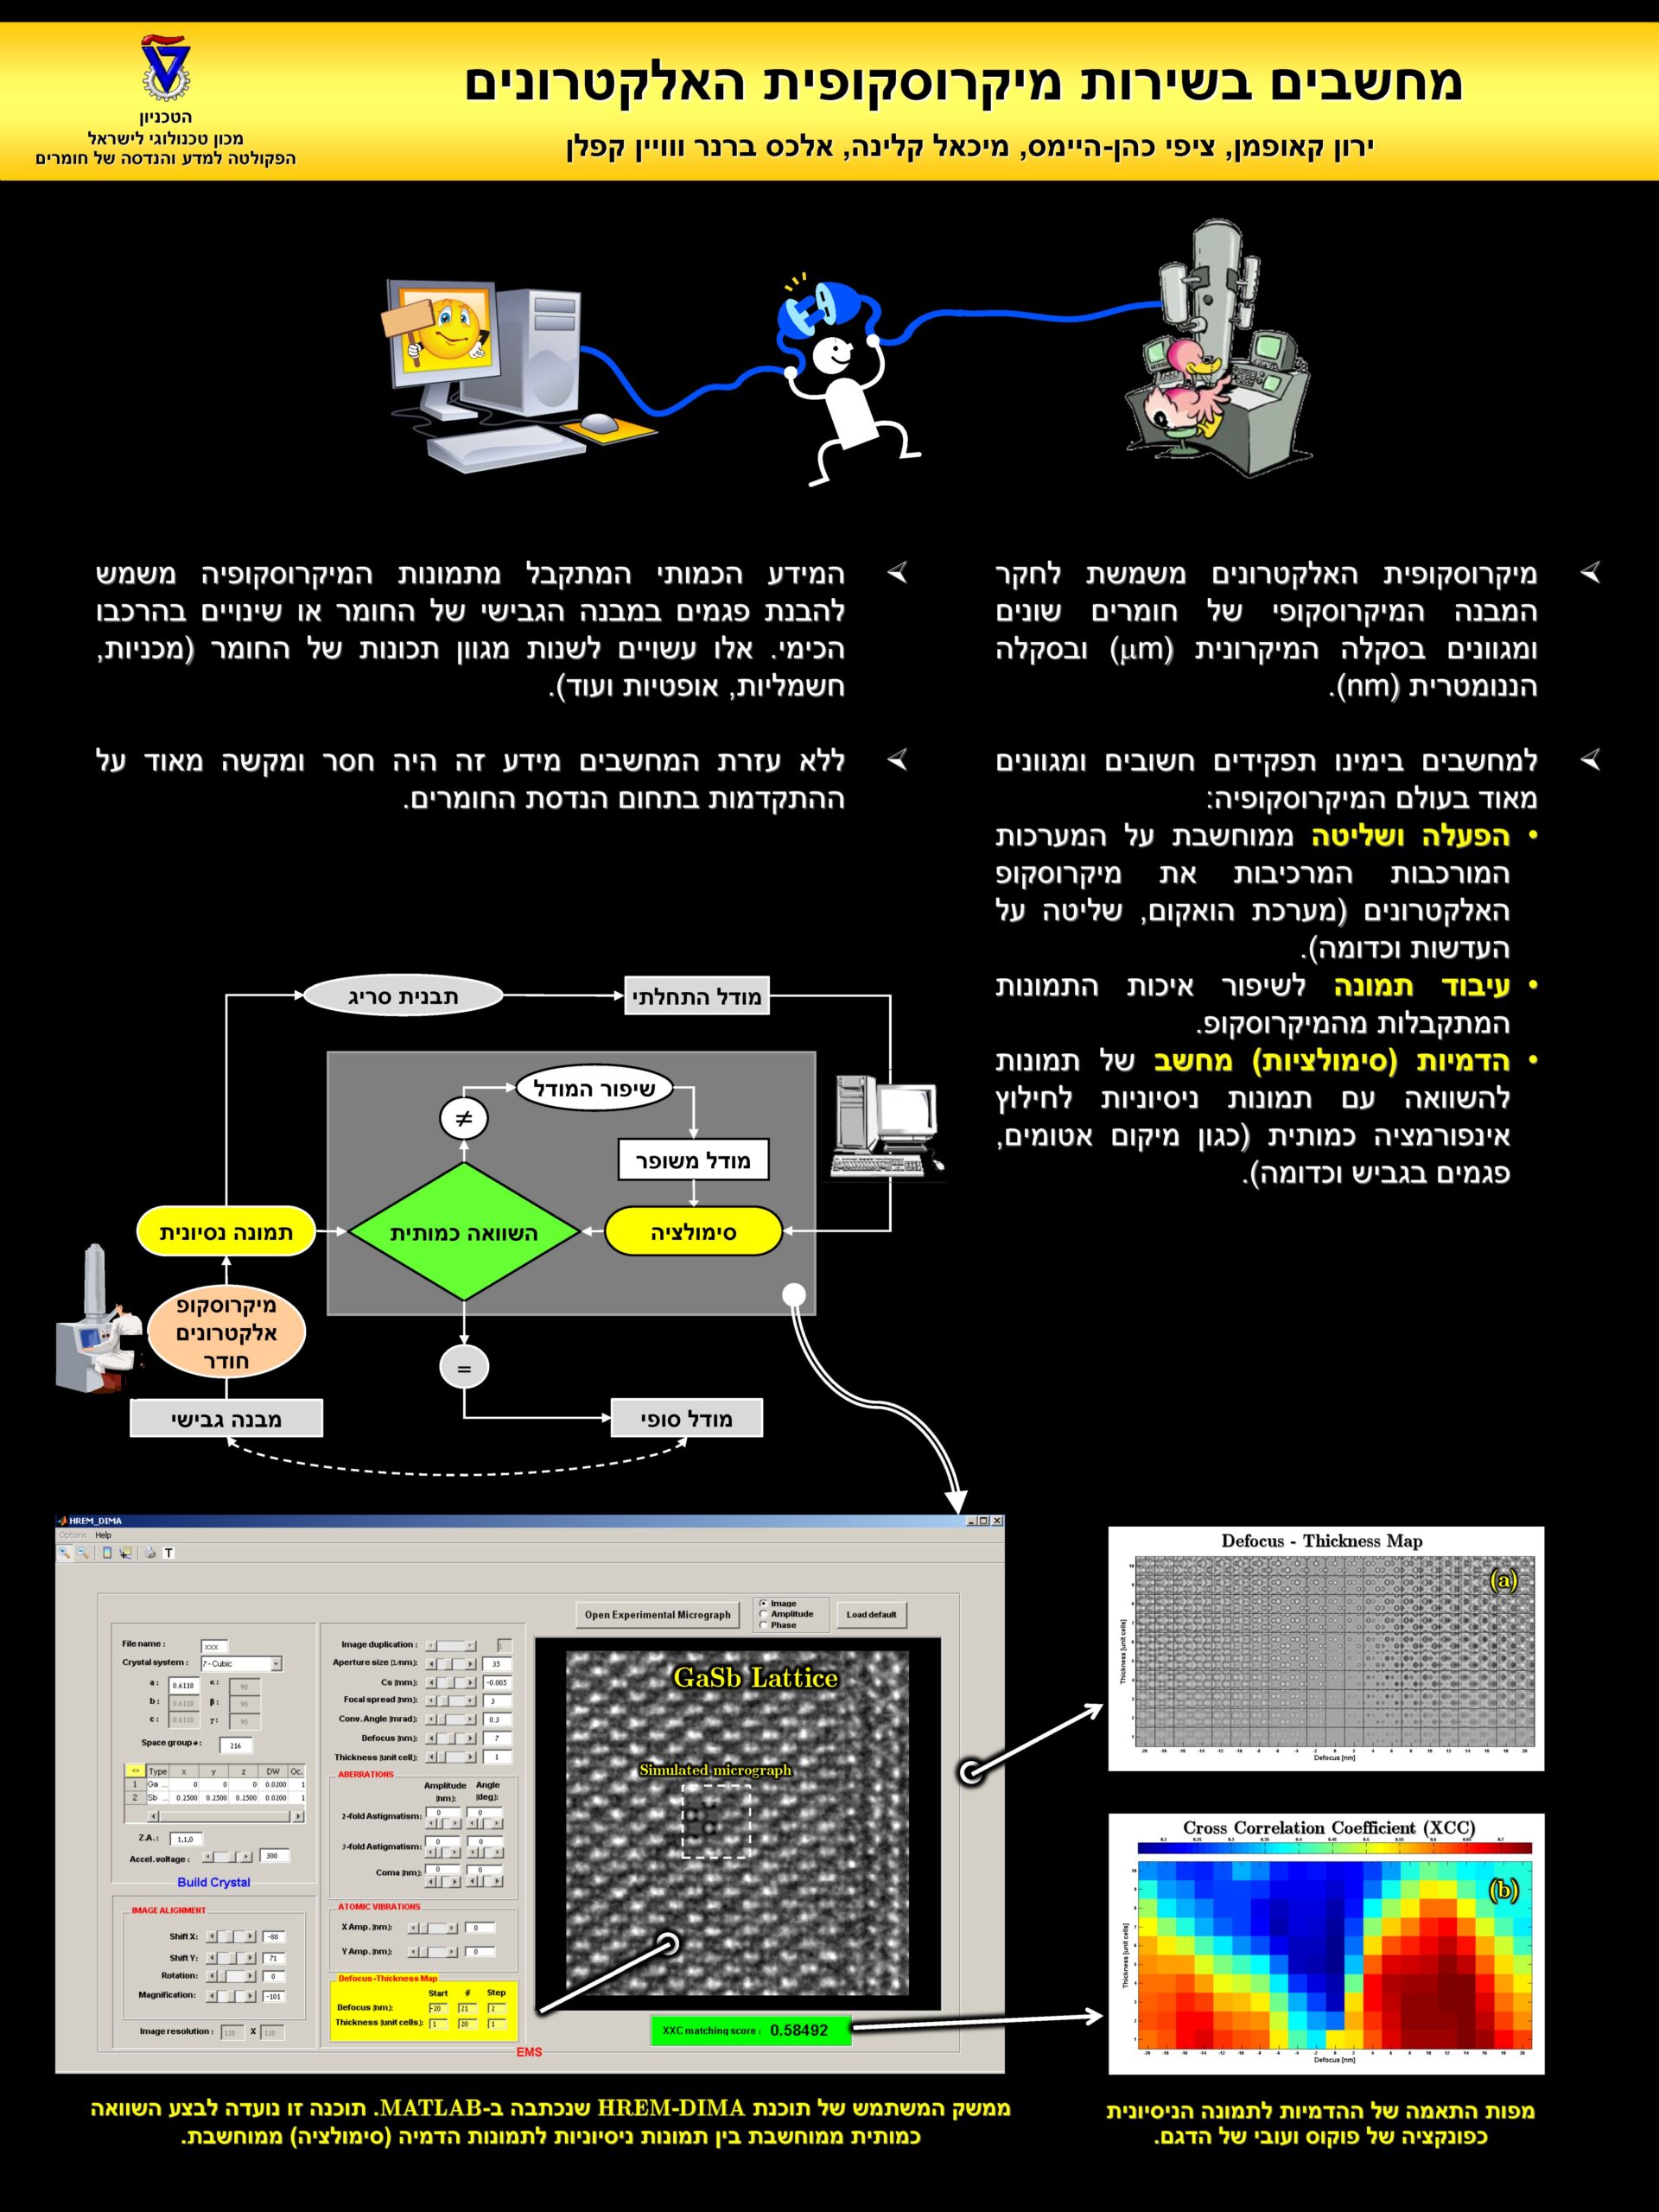 Scientists-Night-2012-image-processing